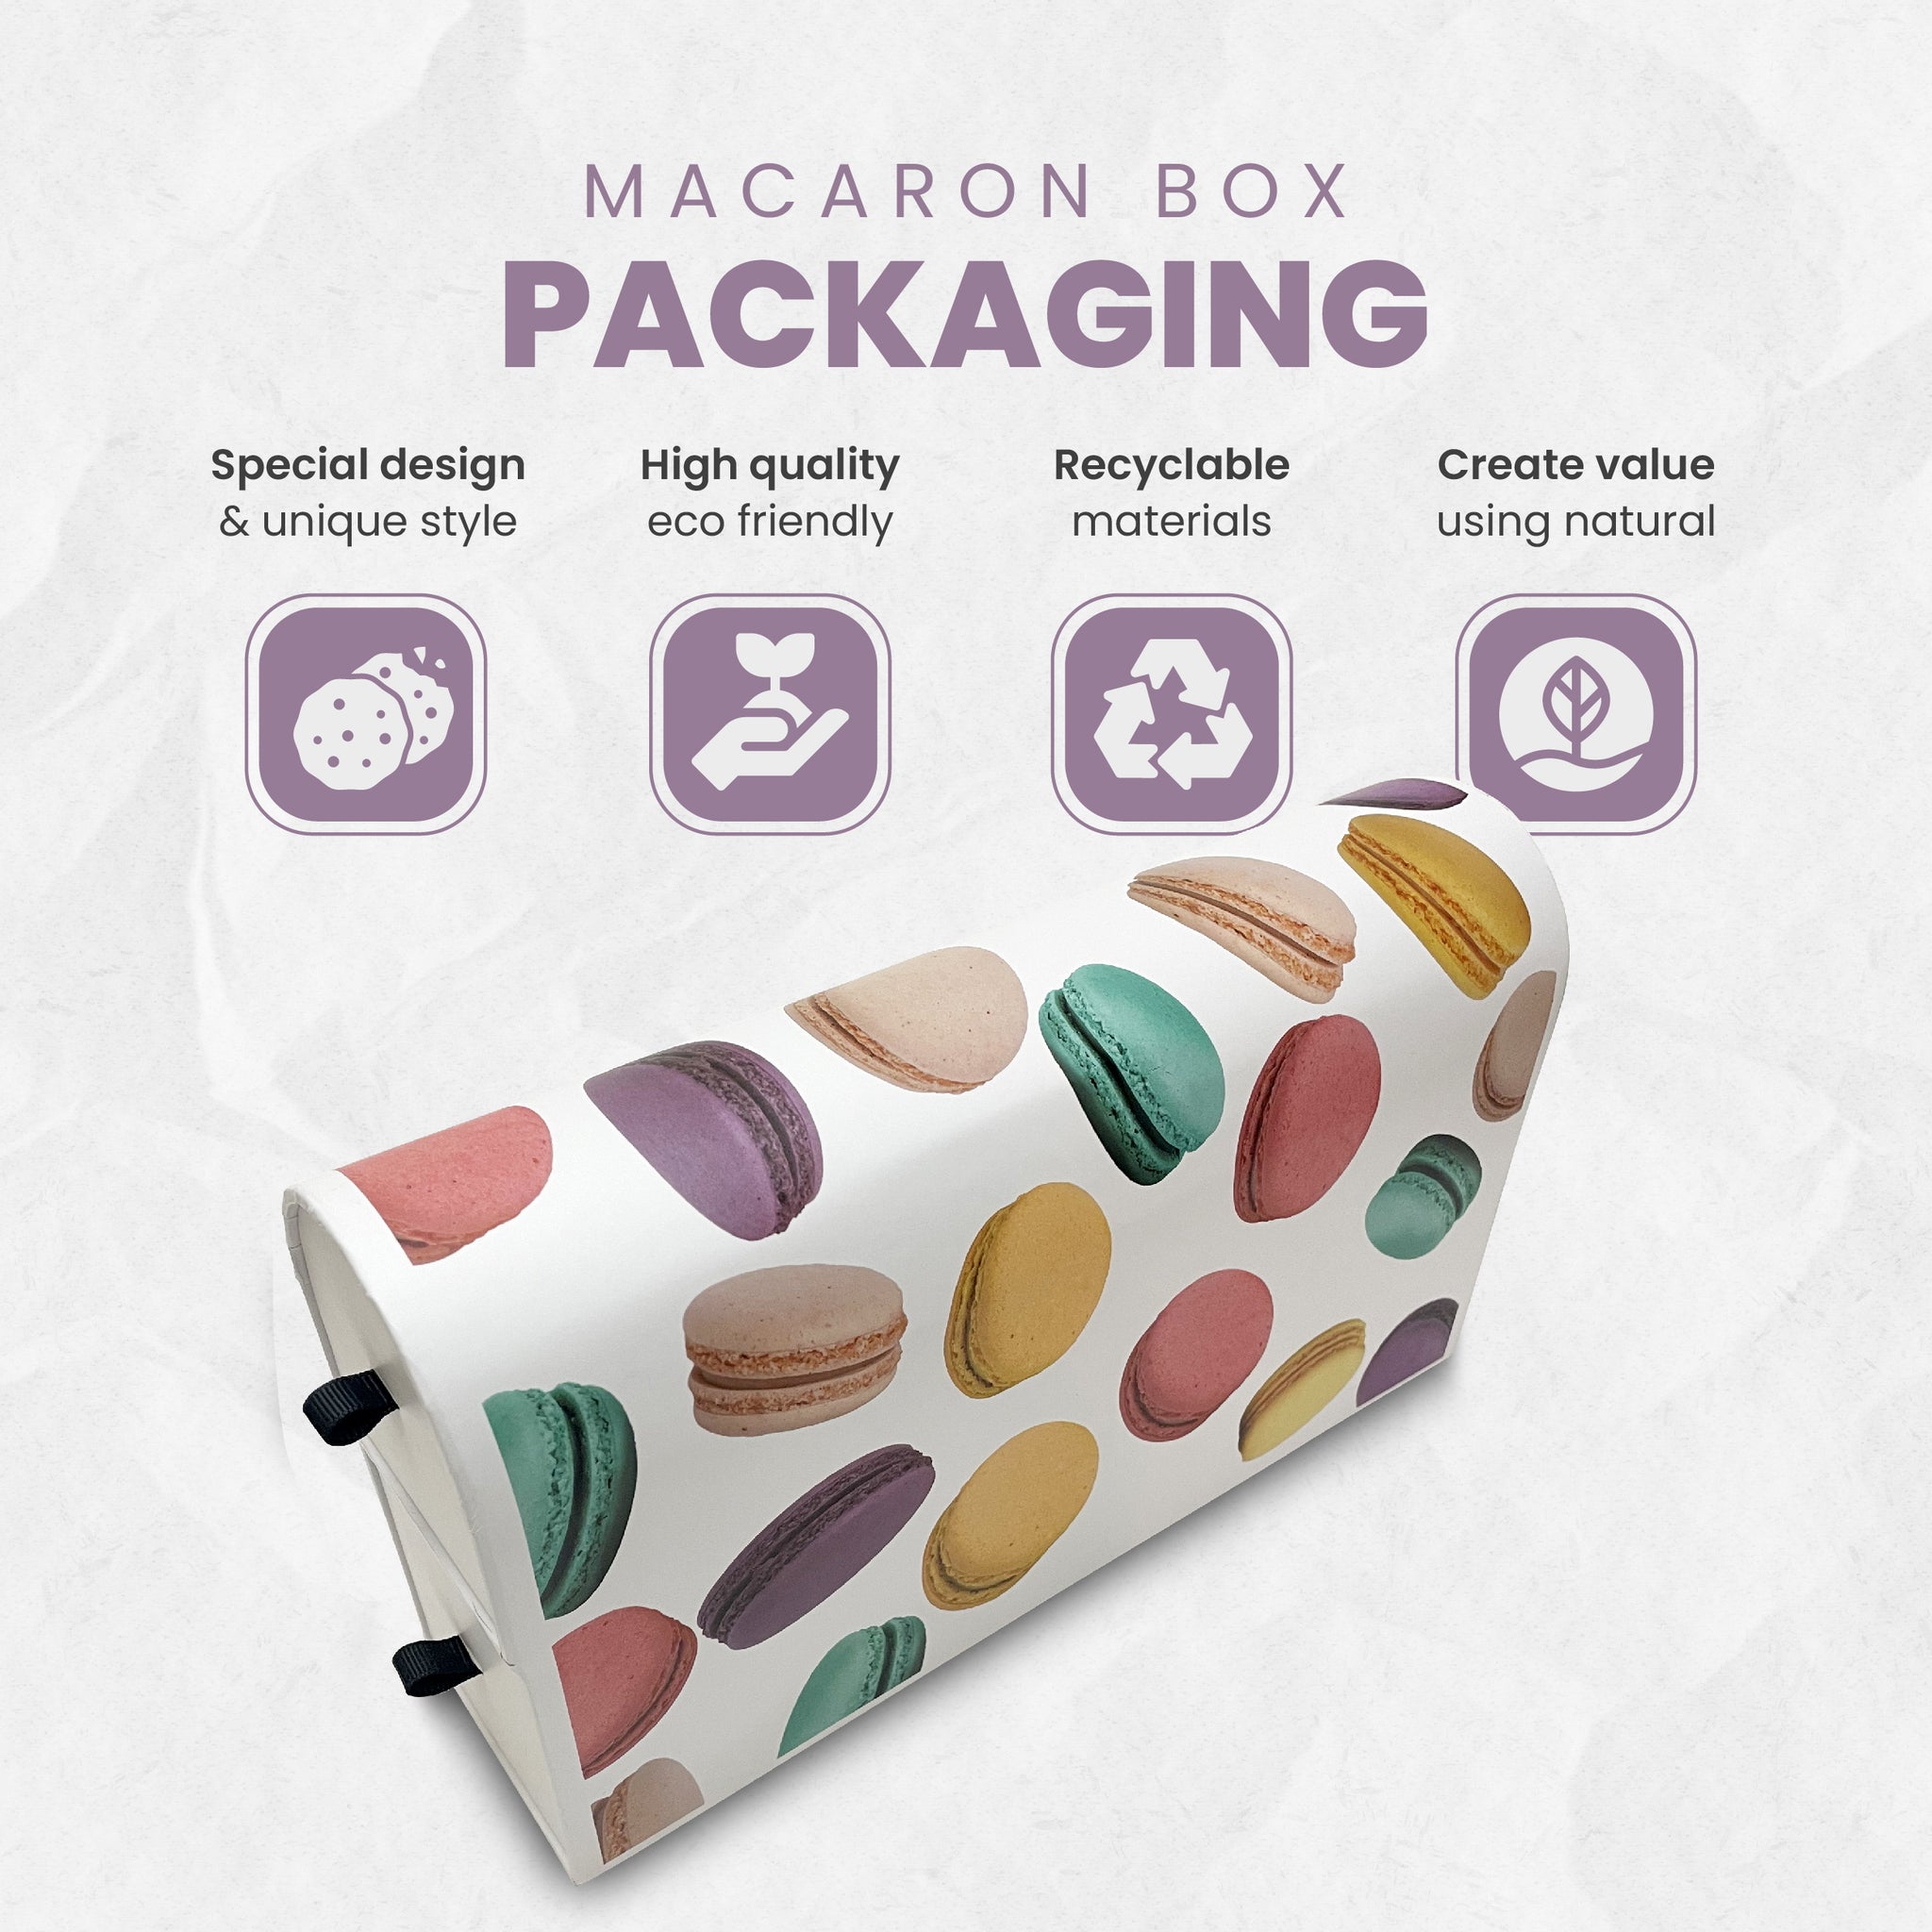 Luxury Macaron Box for Special Events with a Print, Holds 15 Macarons